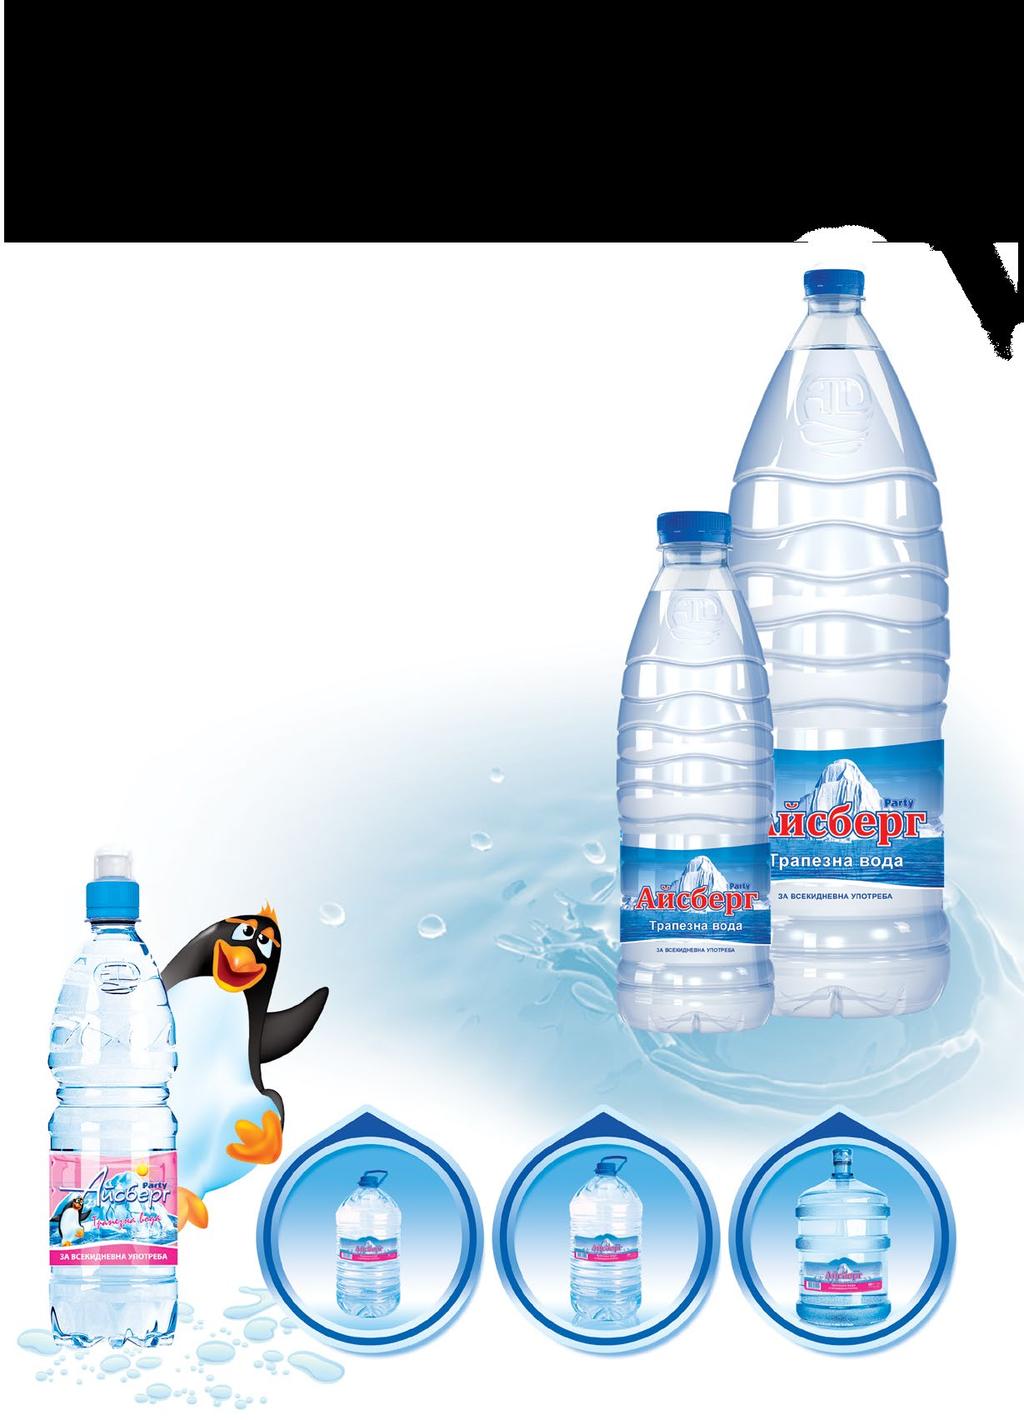 Processed in modern technology. The water has very low mineralization. Suitable for everyday use. Suggested cuts and packages of: 0.500 l, 2.5l 1.5 l, 5 l, 10 l, 19 l.